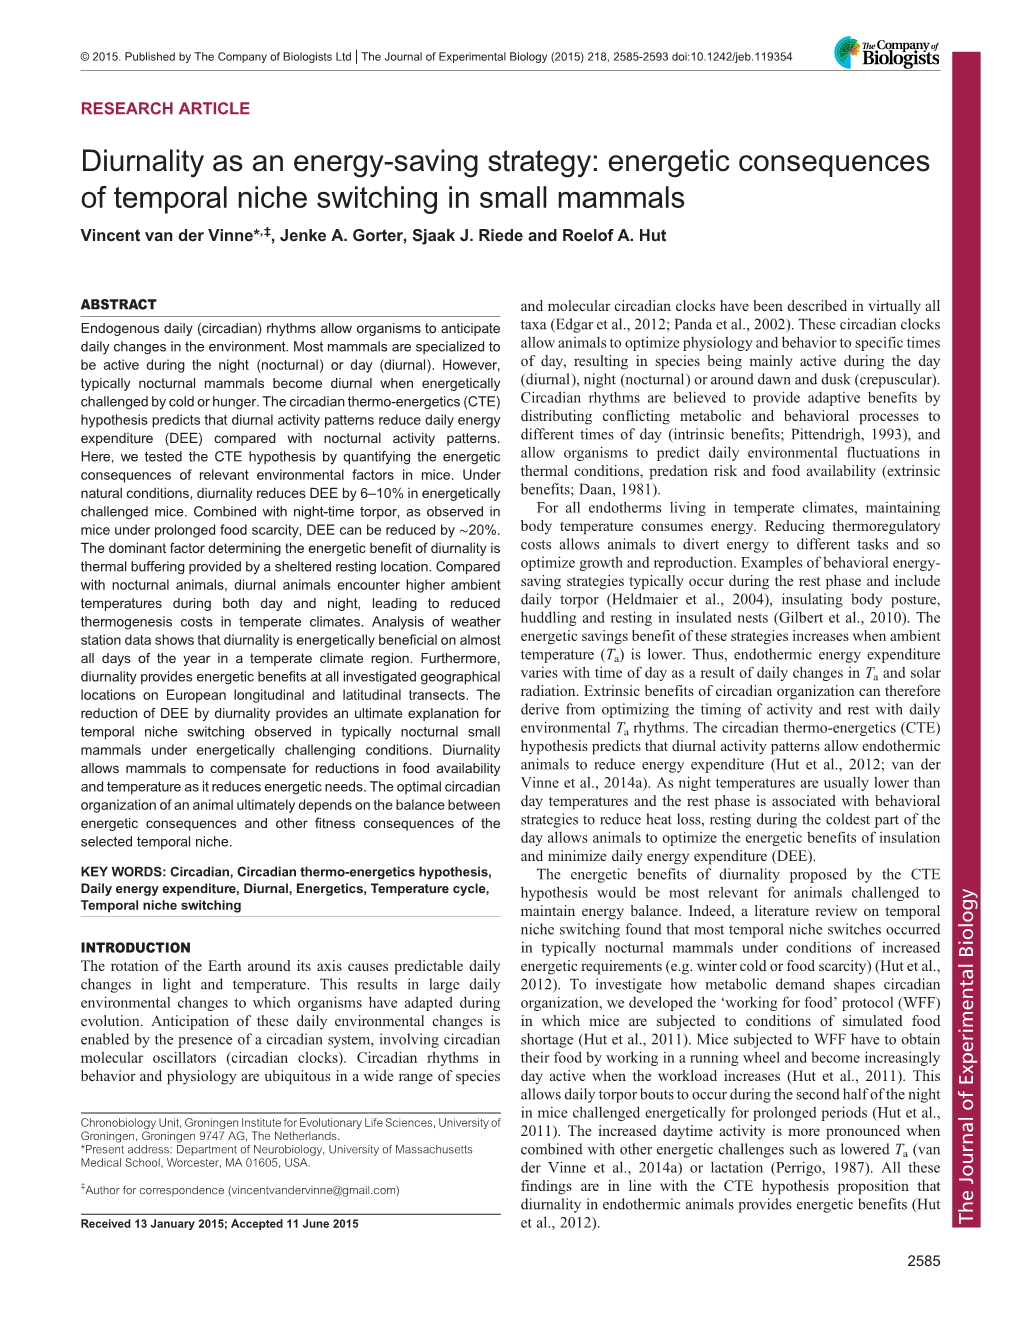 Diurnality As an Energy-Saving Strategy: Energetic Consequences of Temporal Niche Switching in Small Mammals Vincent Van Der Vinne*,‡, Jenke A